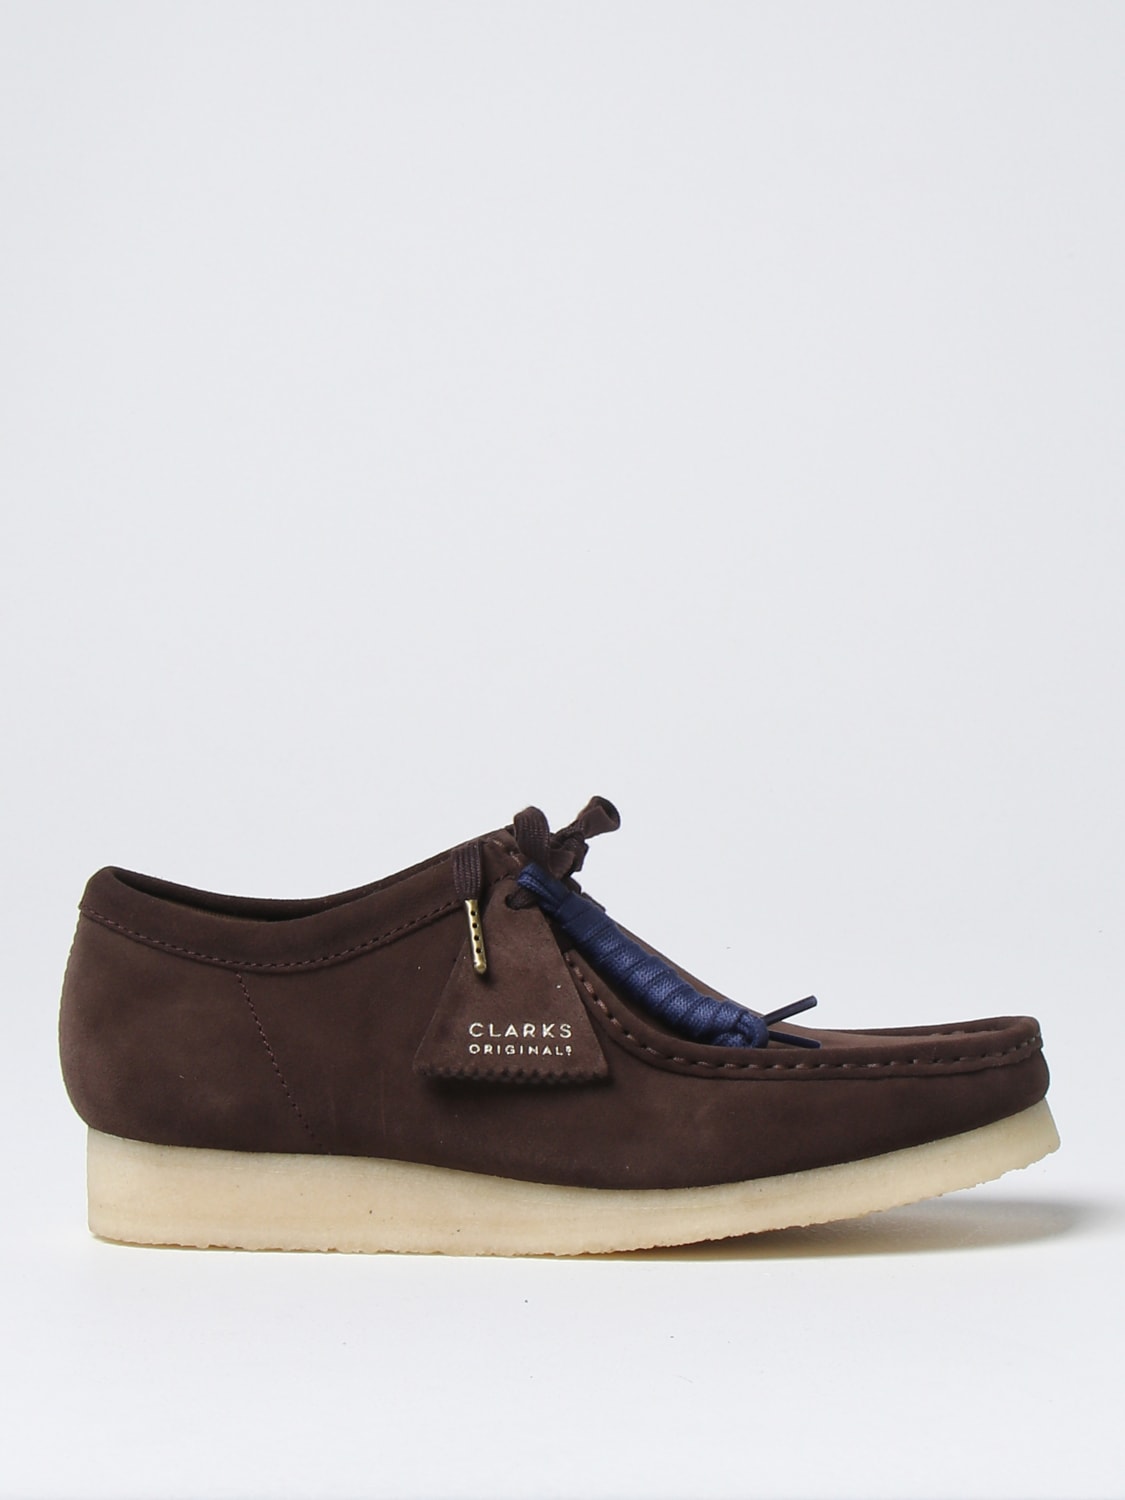 CLARKS chukka boots for man - Brown | Clarks Originals chukka boots 26156606 online on GIGLIO.COM